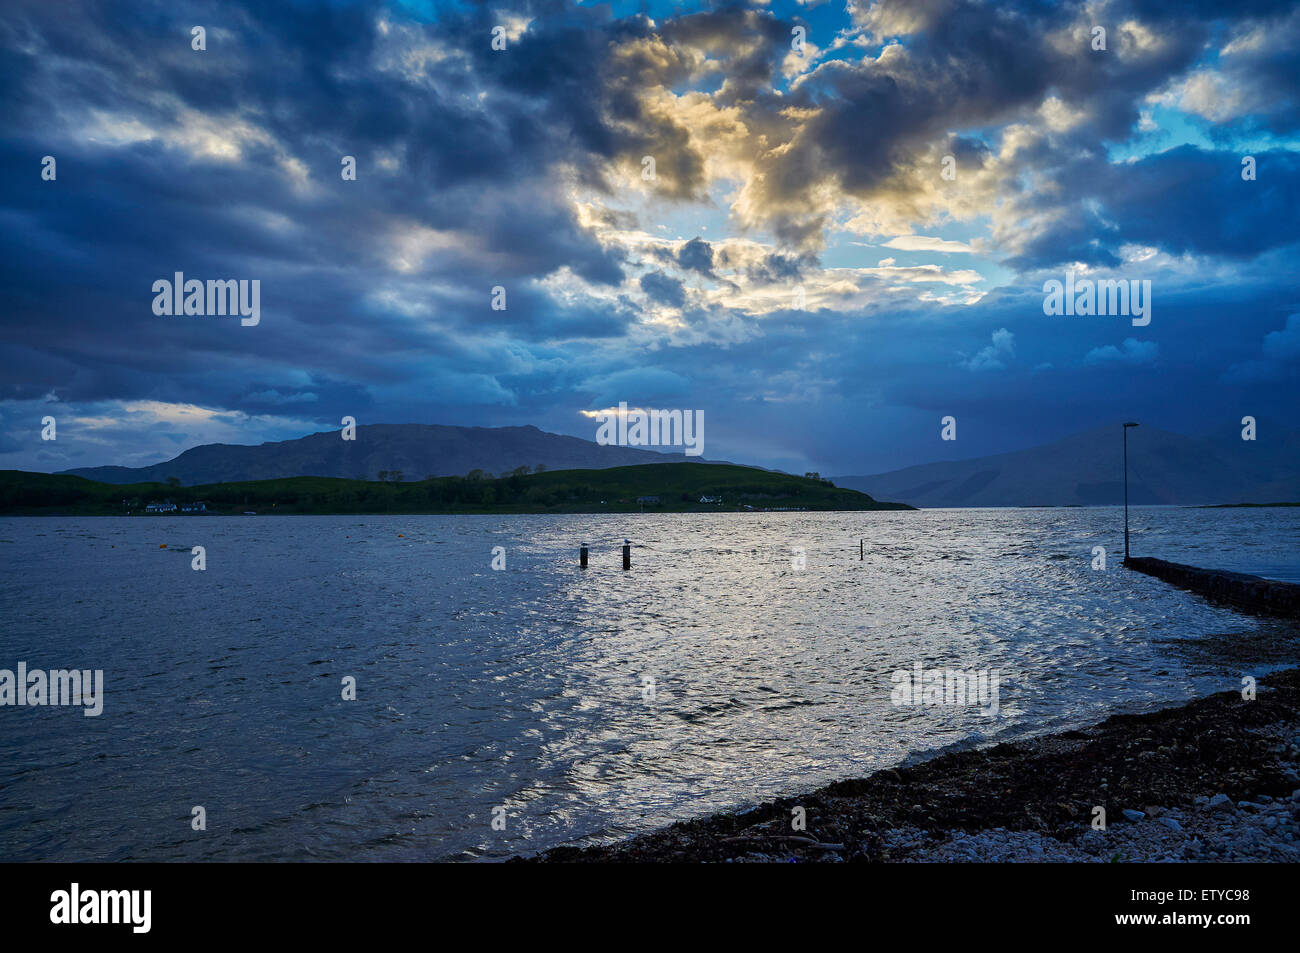 Dusk, Port Appin, Argyll, Western Scotland looking across to the island of Lismore Stock Photo